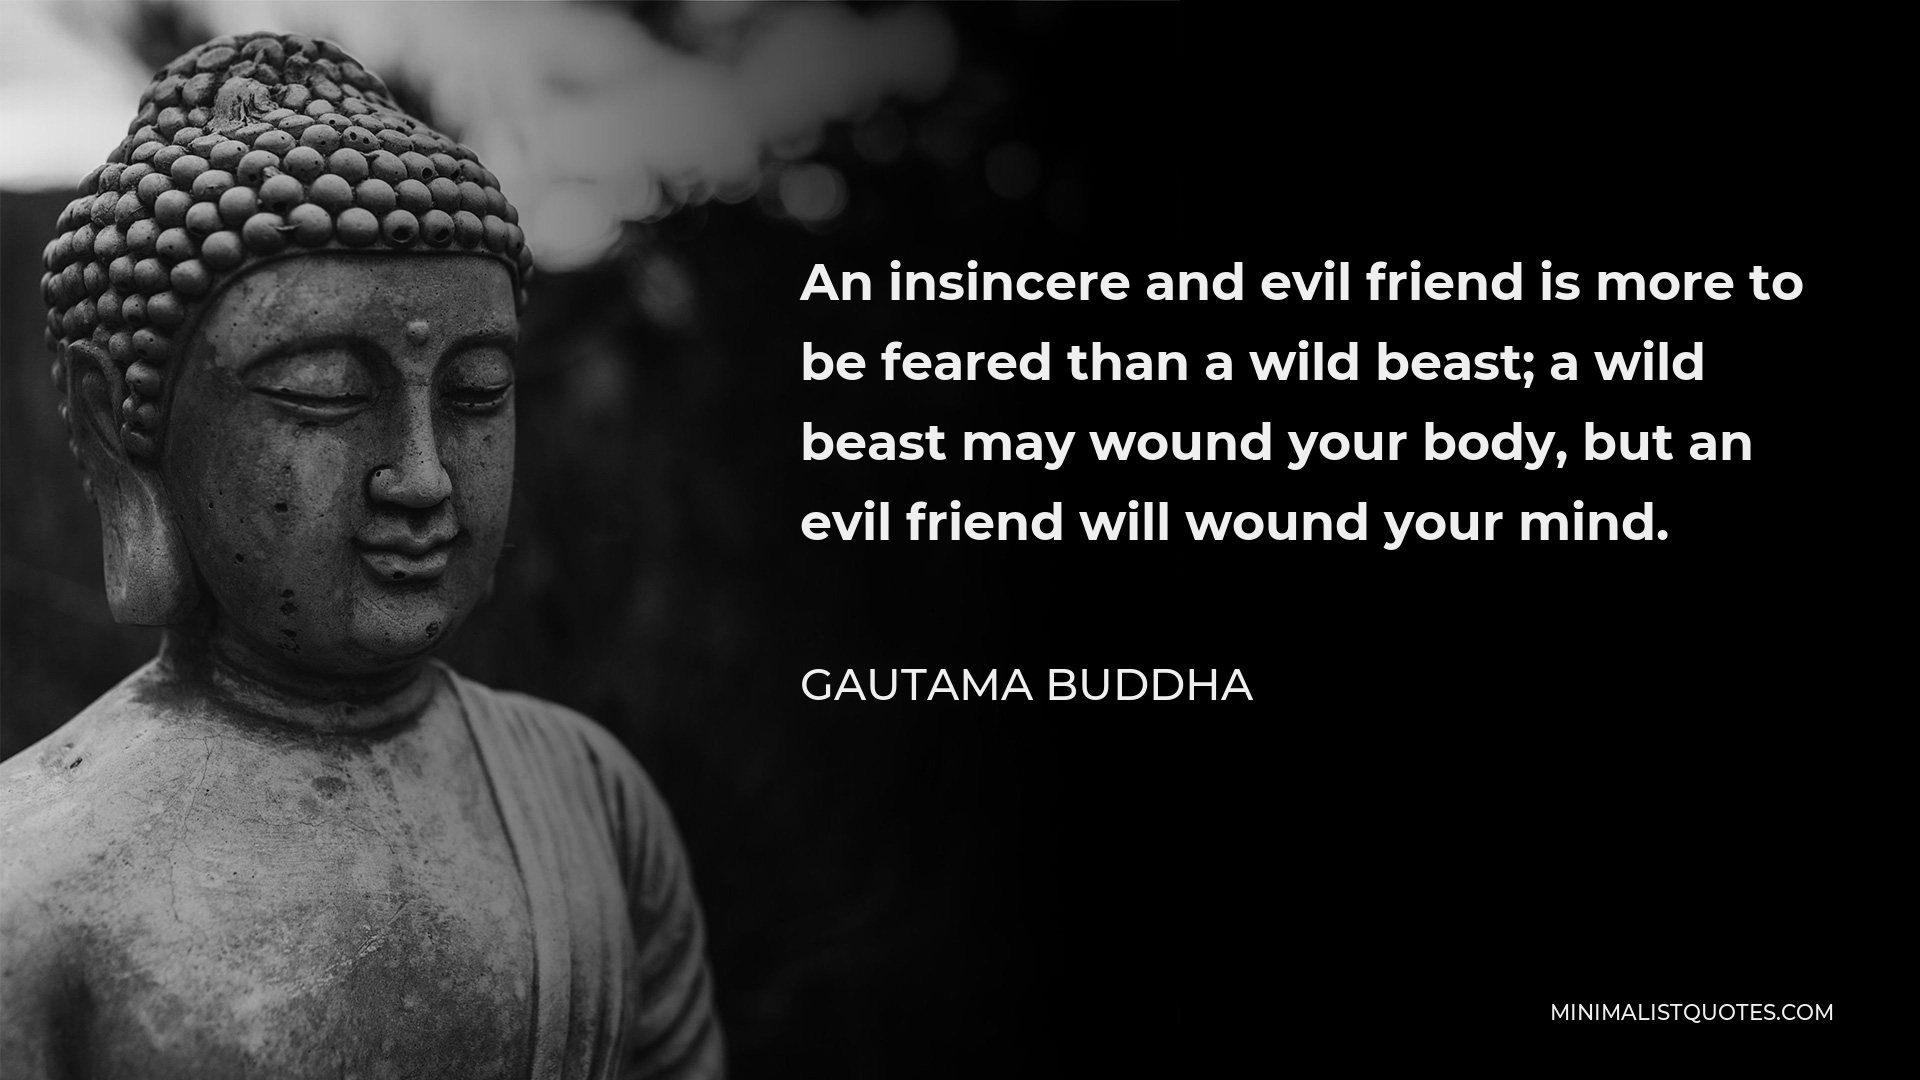 Gautama Buddha Quote - An insincere and evil friend is more to be feared than a wild beast; a wild beast may wound your body, but an evil friend will wound your mind.